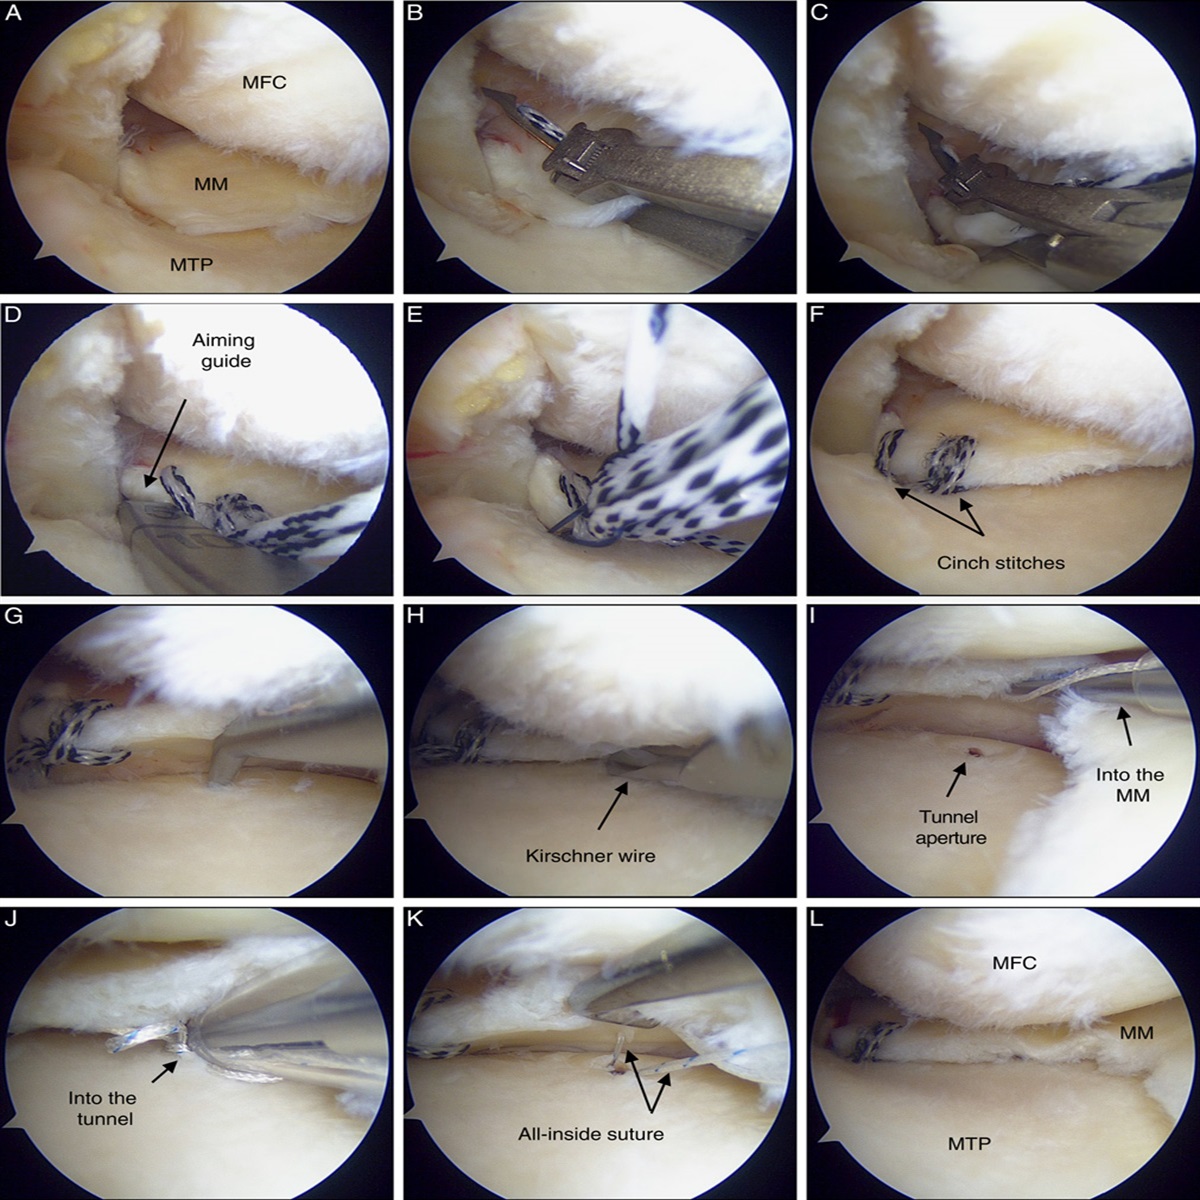 Novel Posterior Anchoring Method Associated With Medial Meniscus Posterior Root Repair